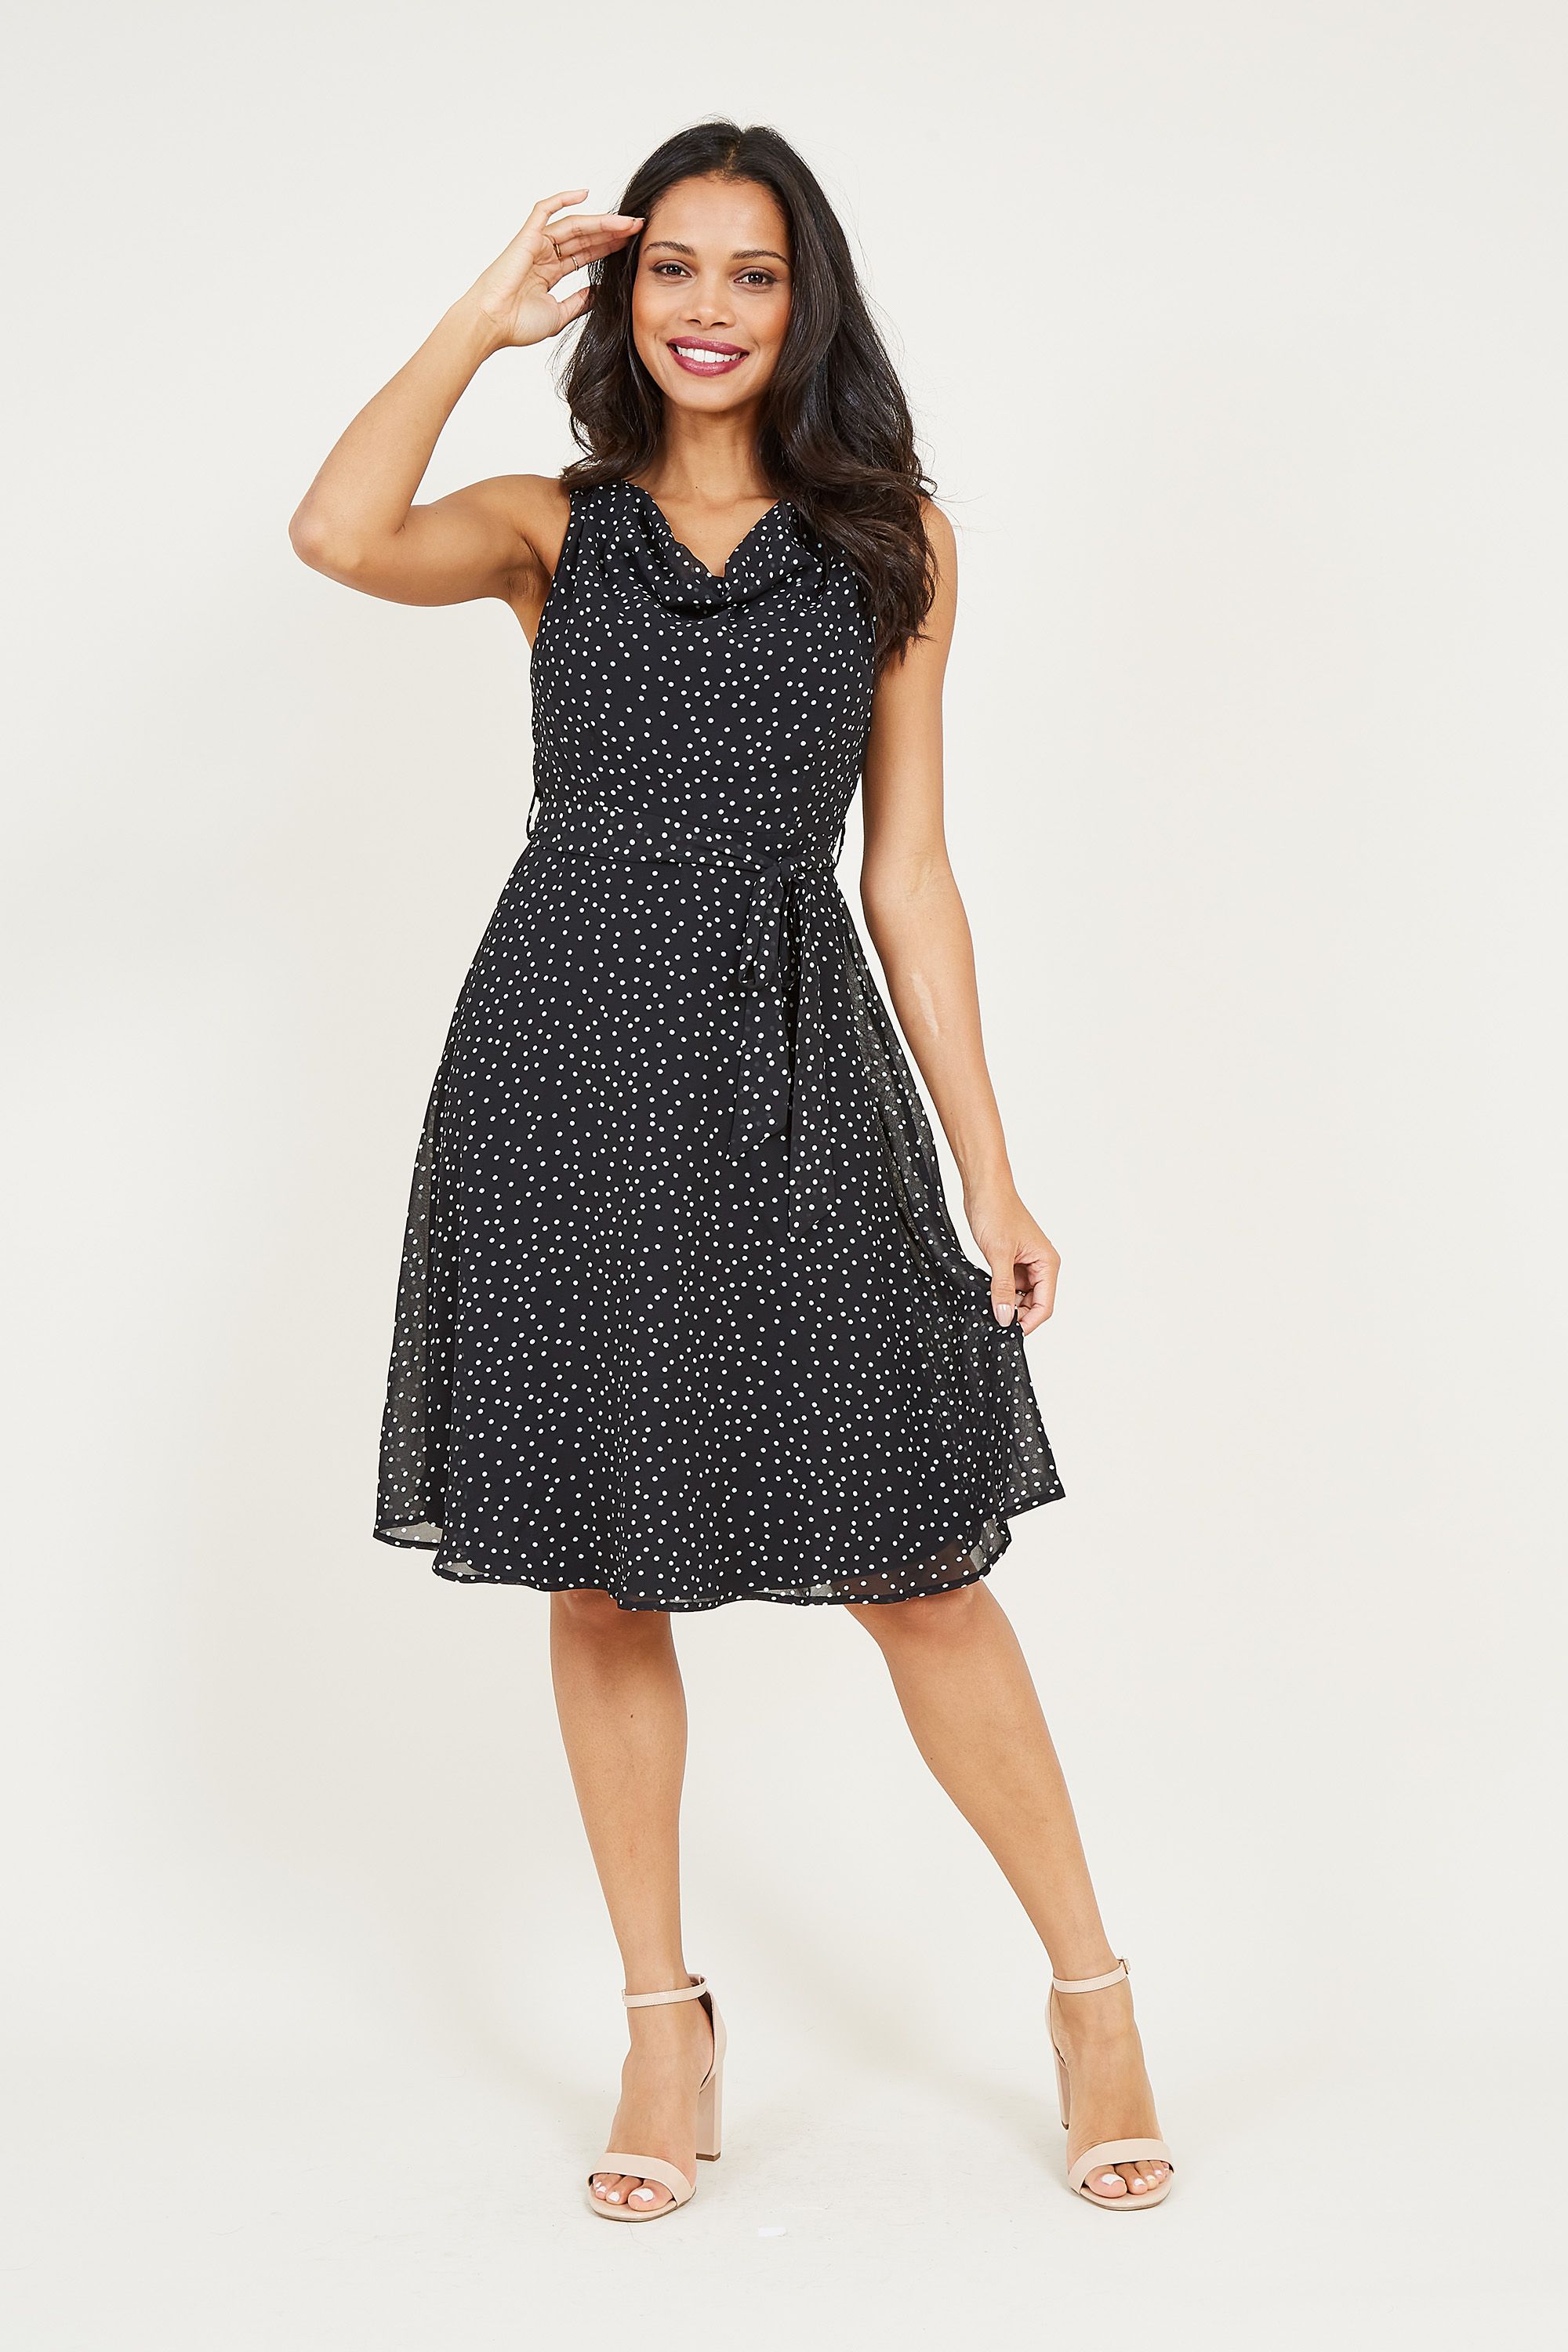 Exude total sophistication with our Mela Polka Dot Skater Dress. Featuring a classic fit and flare shape, it's made from lighweight fabric that drapes over the knee. With a tie waist to adjust to your profile, it's enhanced by a cowl neckline for a voluminous finish. Wear with heels to work or dress it down on weekends.